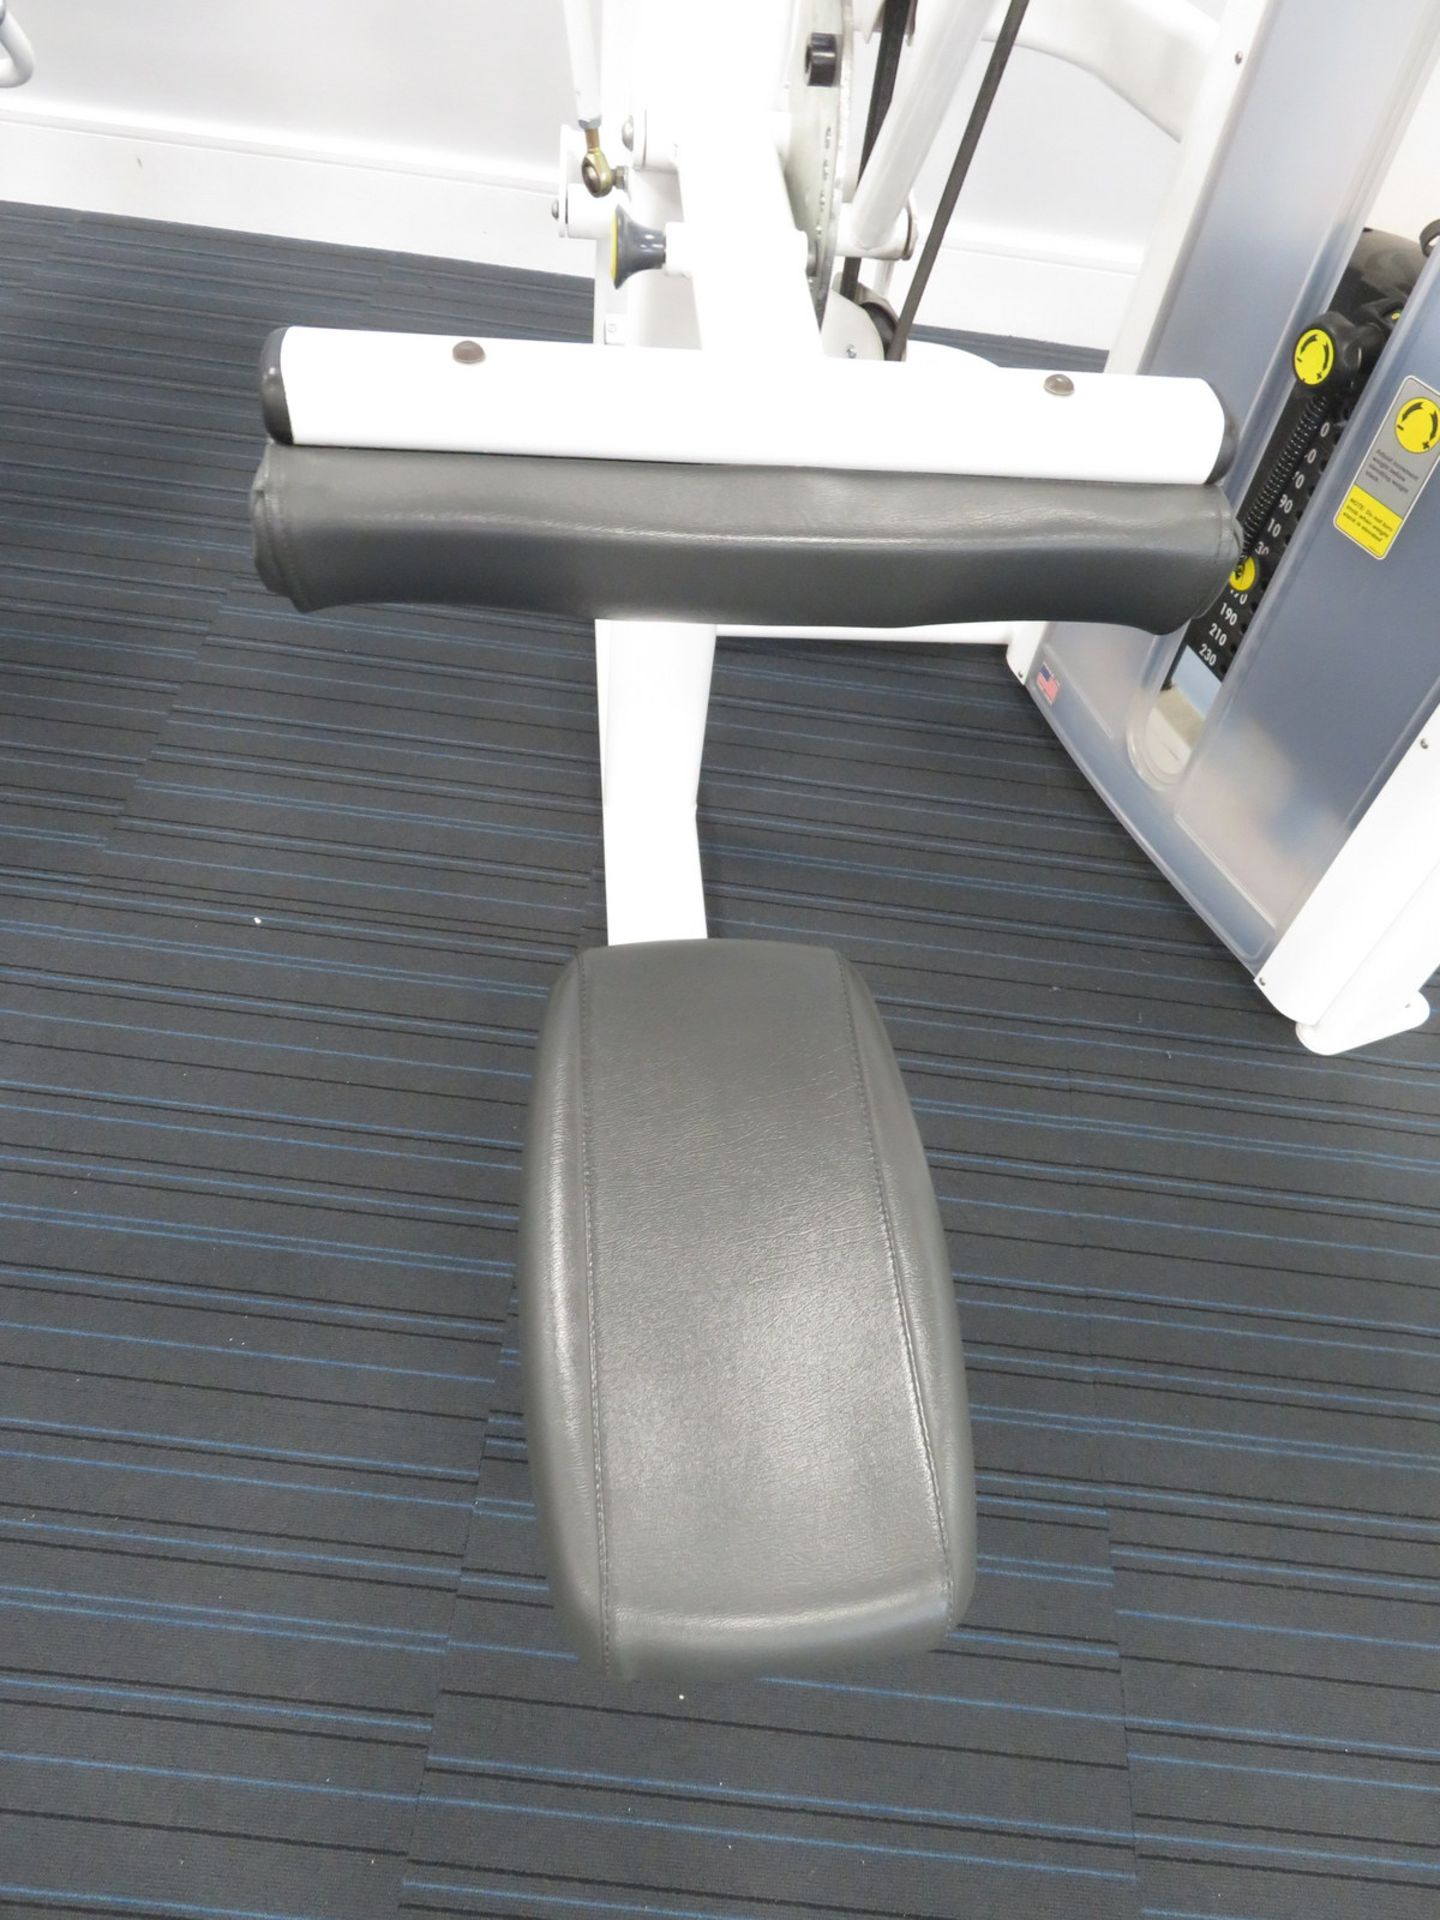 Cybex Pulldown Model: 12020. 103.5kg Weight Stack. Dimensions: 115x175x195cm (LxDxH) - Image 3 of 10